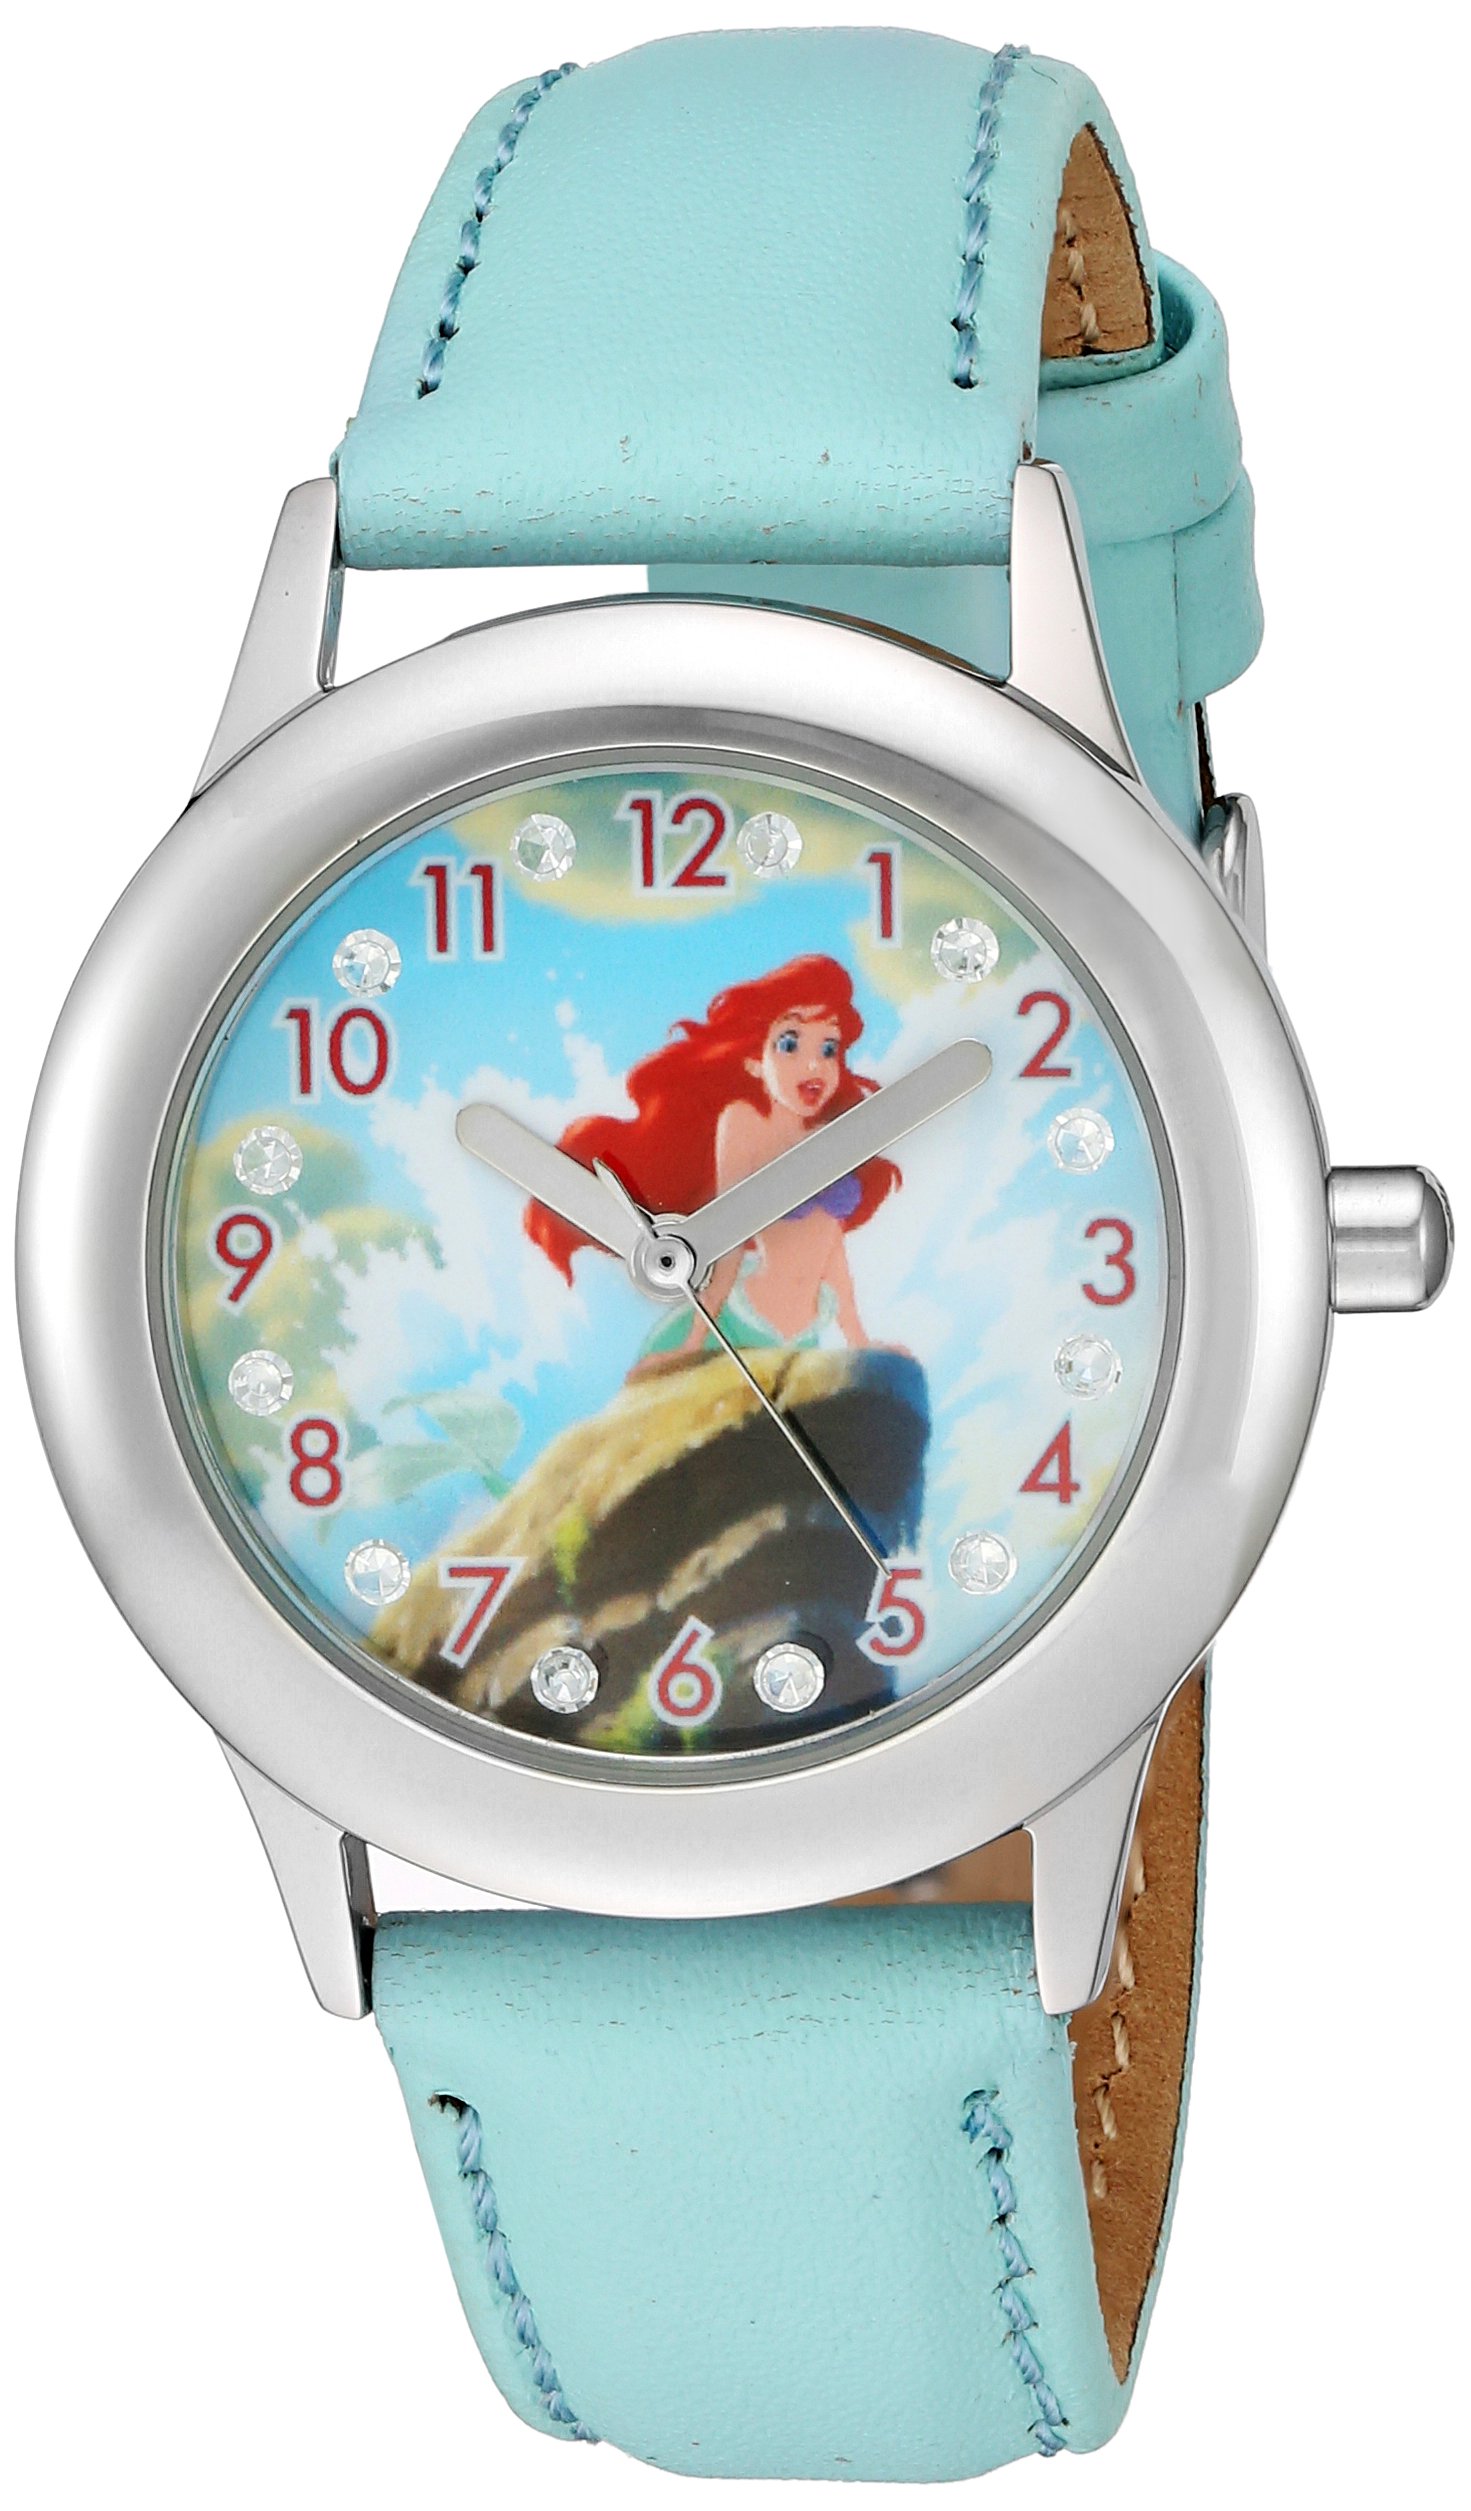 Disney Girl's 'Ariel' Quartz Stainless Steel and Leather Watch, Color:Blue (Model: W002916)